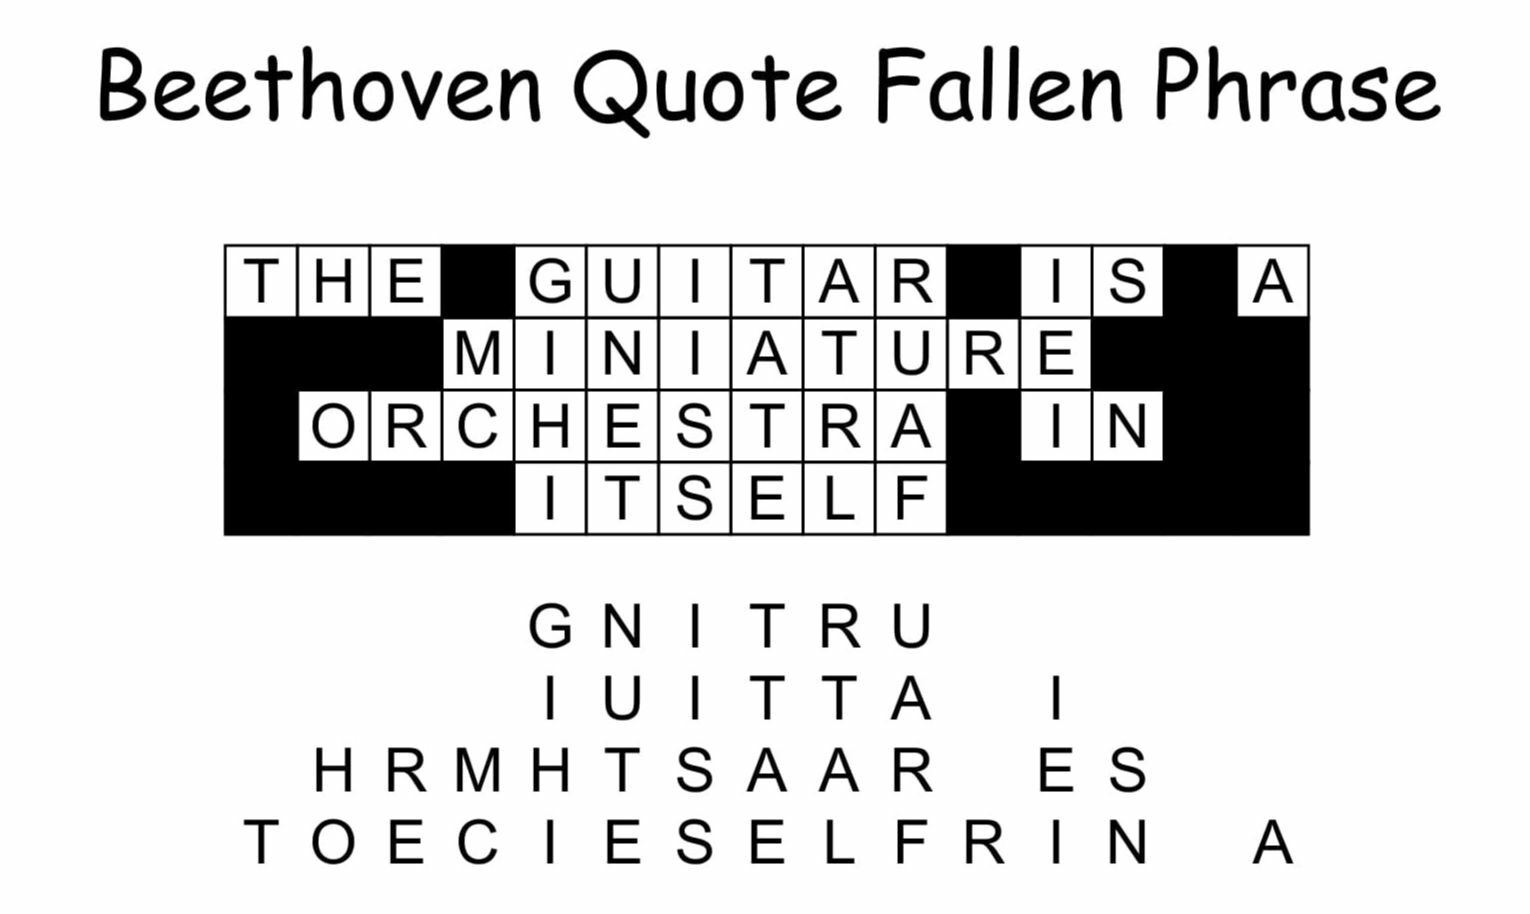 beethoven quote fallen phrase puzzle solution